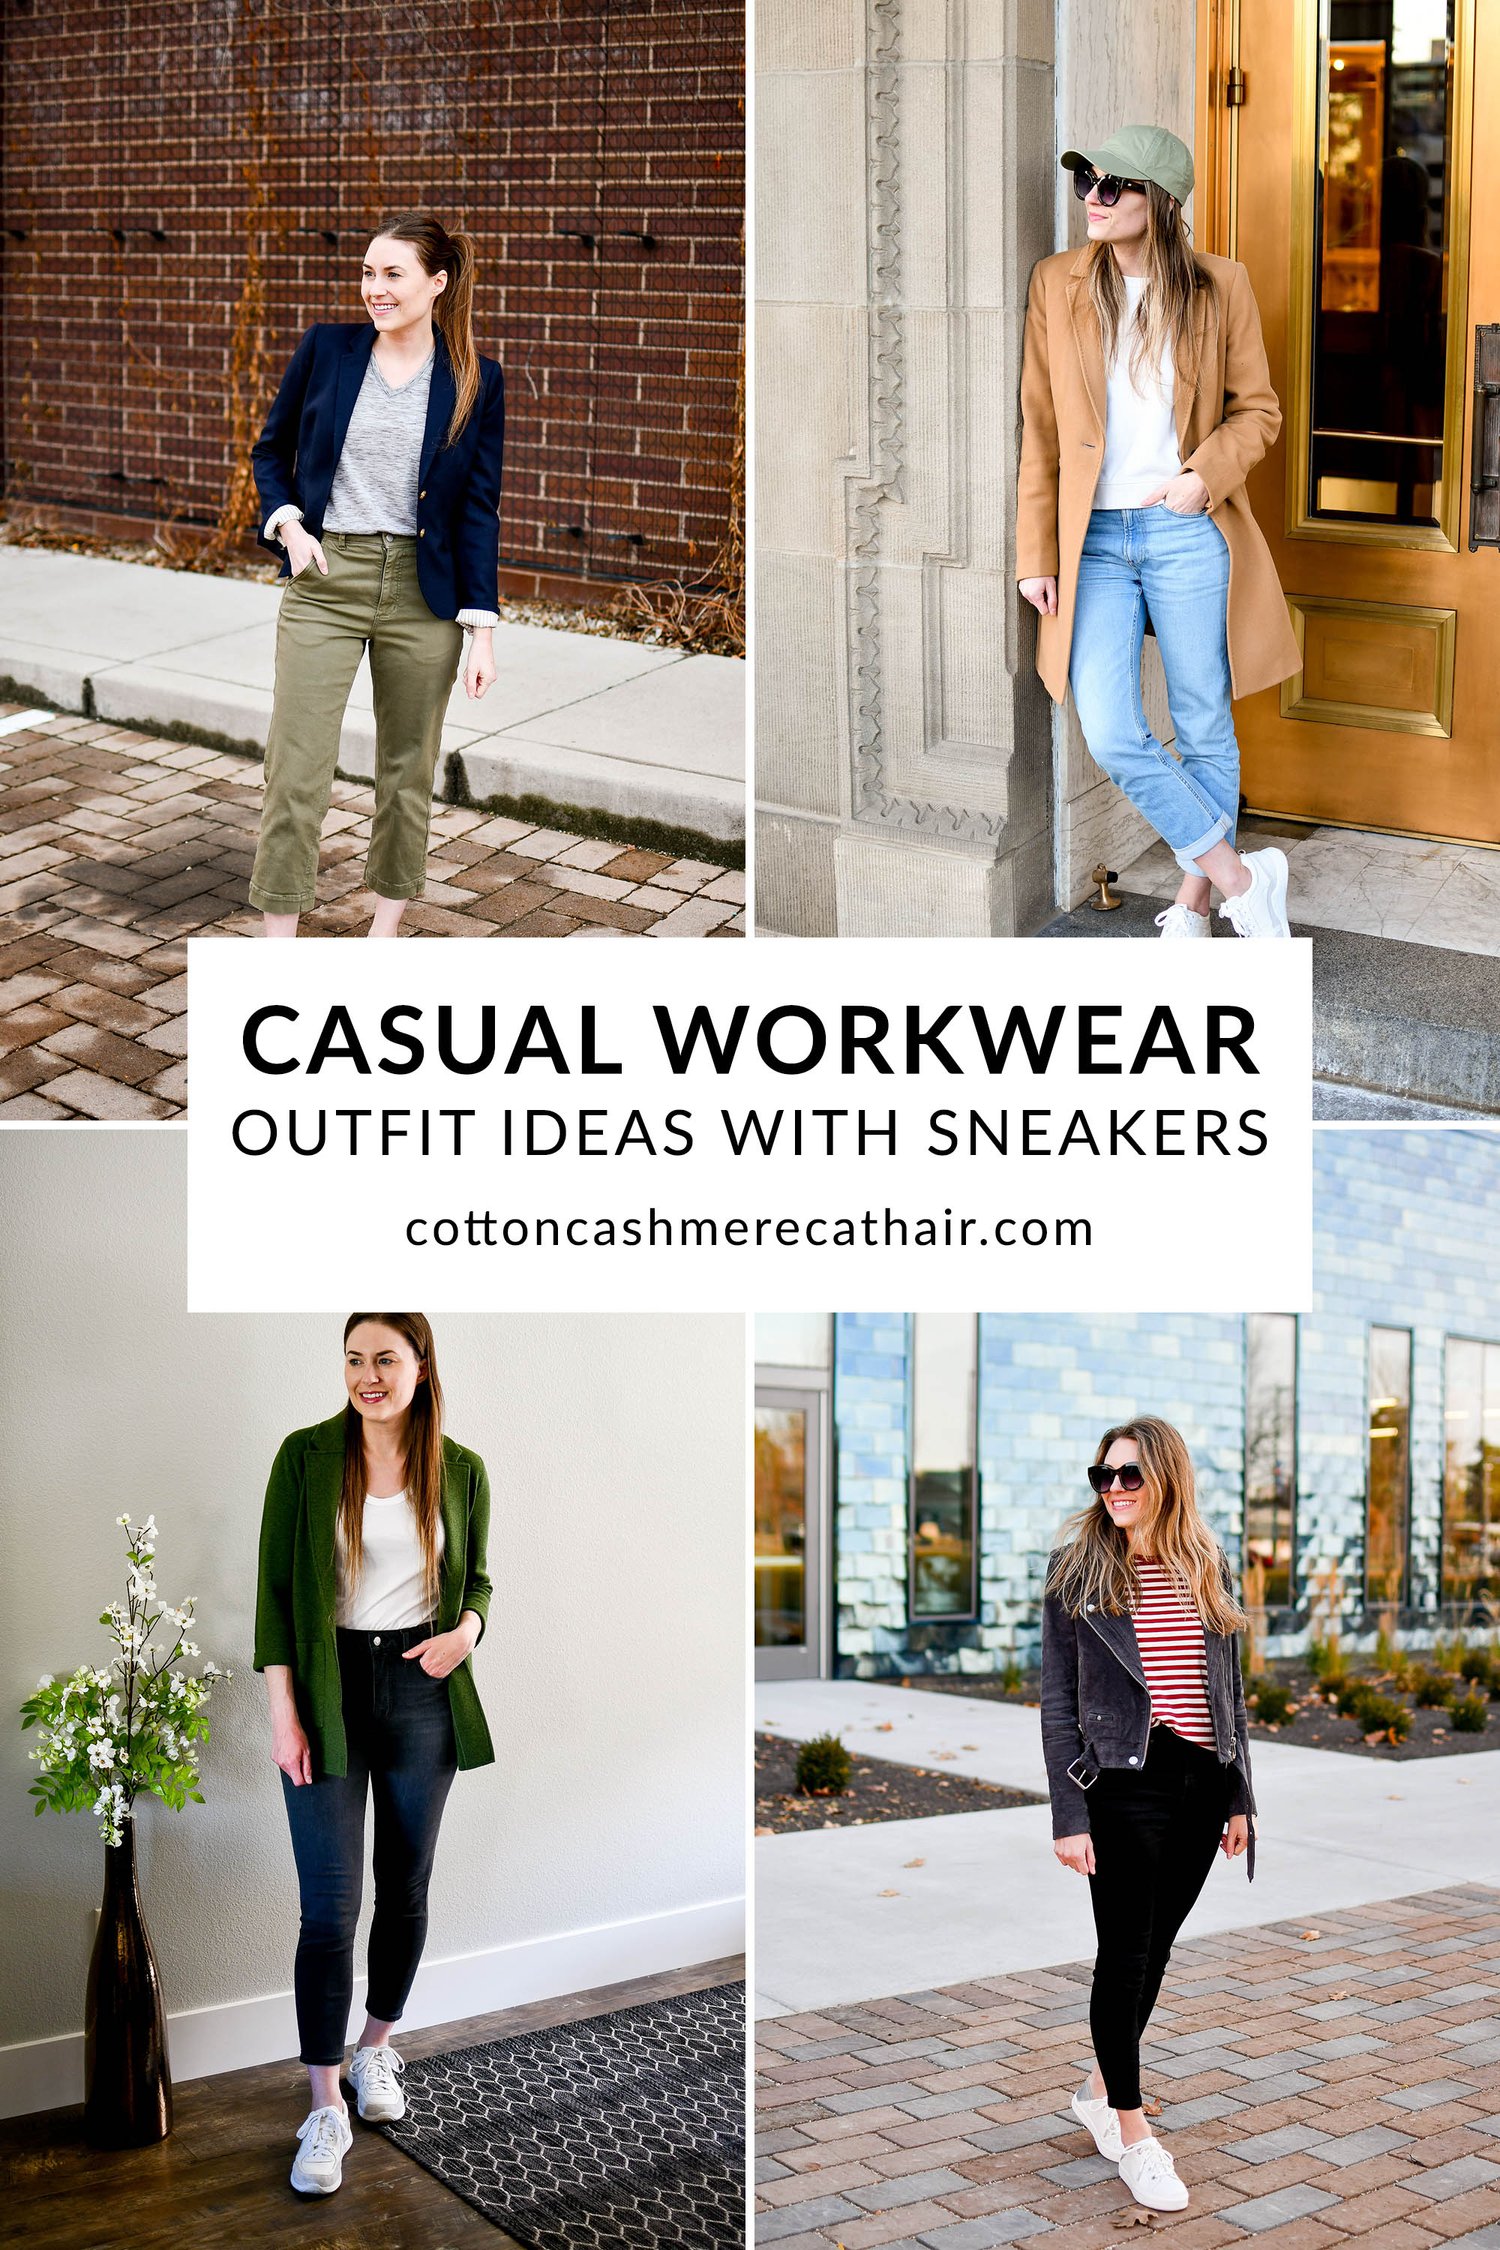 Oxford Shoes with Capri Pants Outfits (2 ideas & outfits)